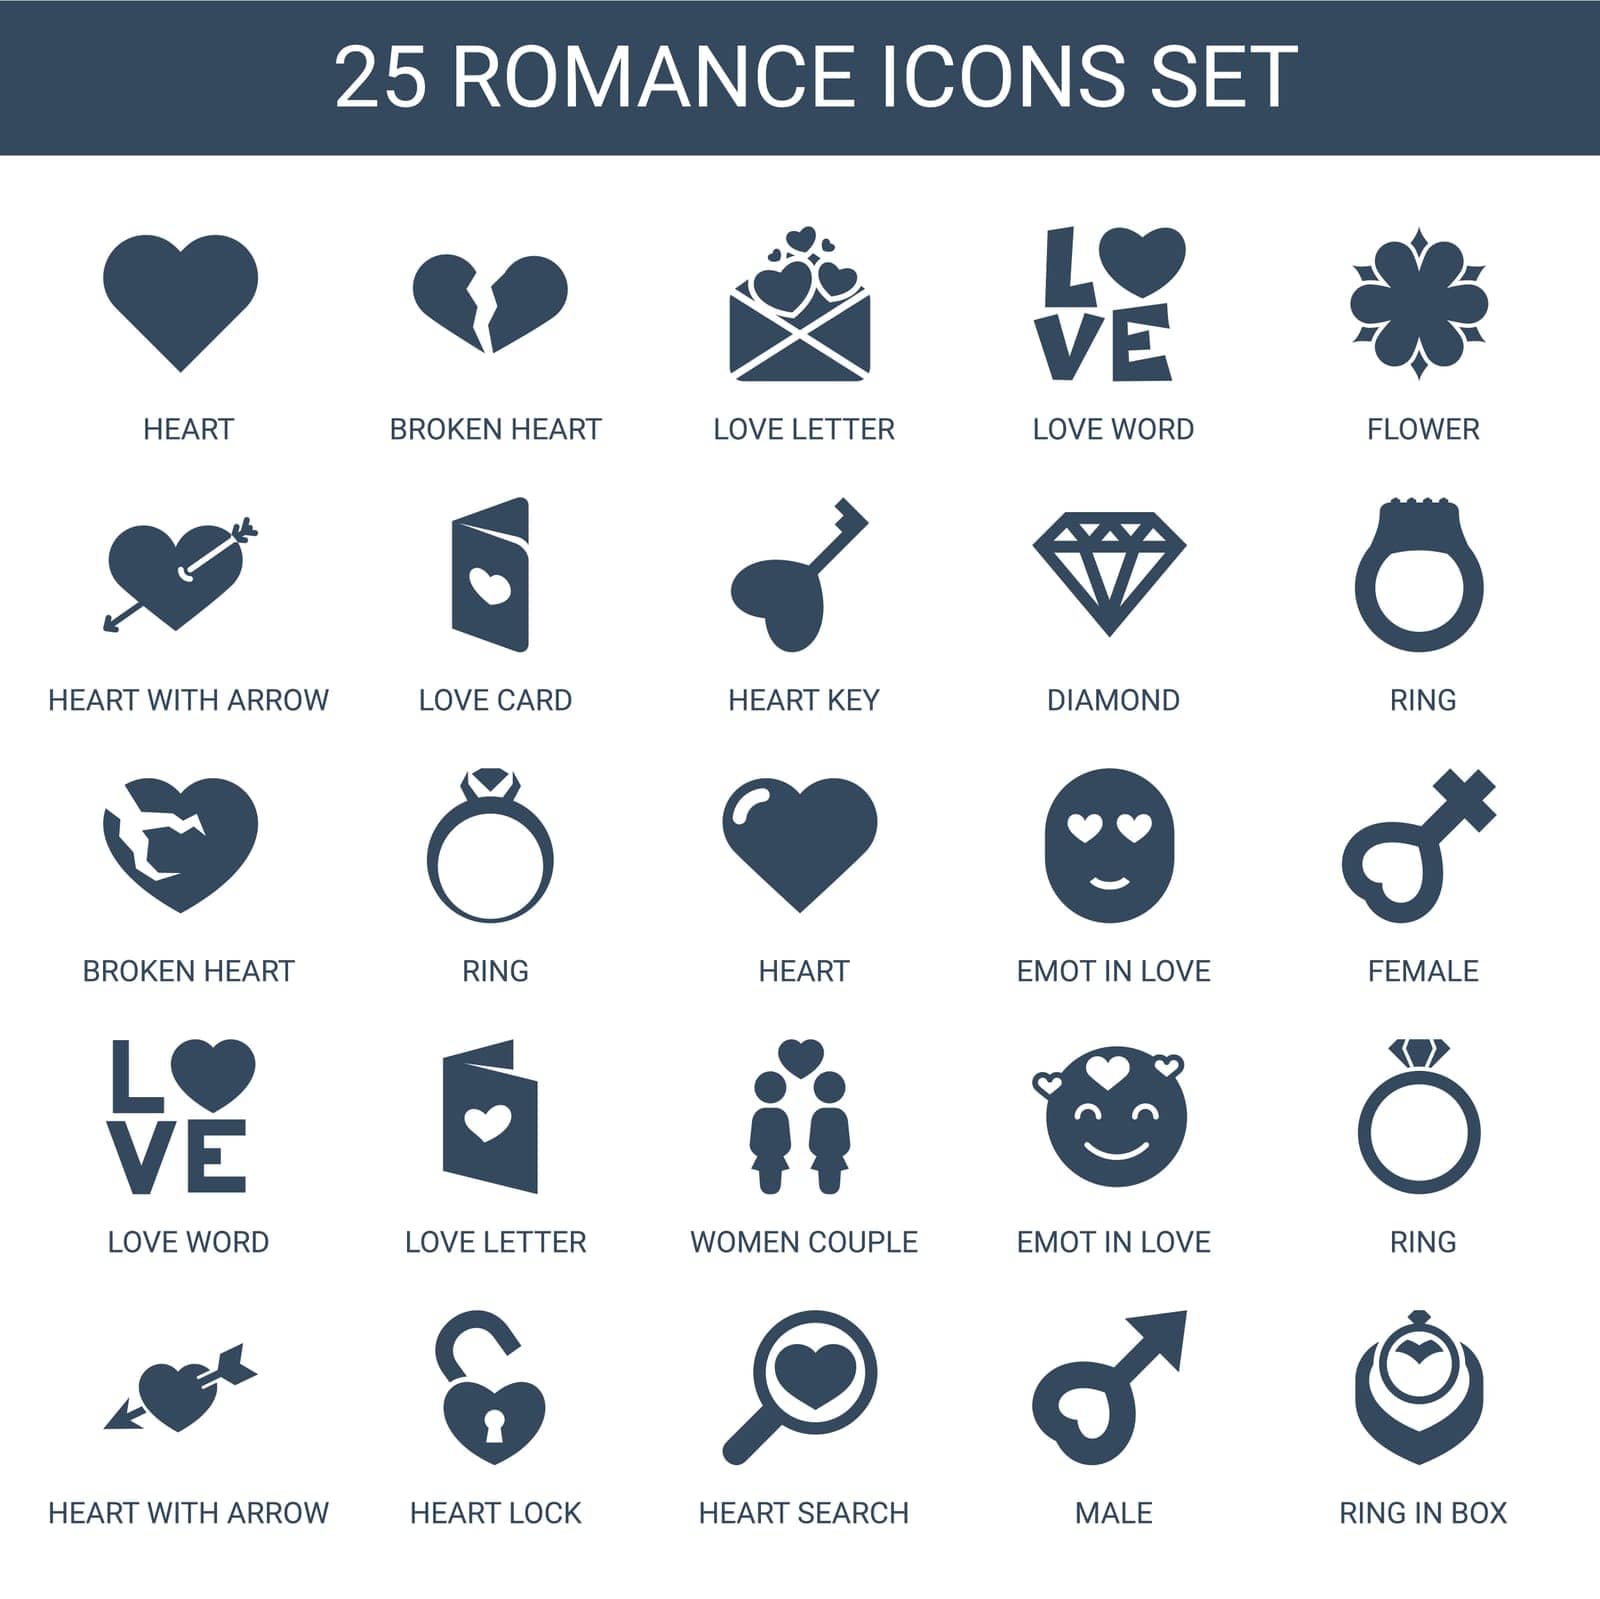 love,symbol,romance,couple,arrow,ring,icon,sign,isolated,box,search,white,design,lock,vector,female,key,broken,emot,set,in,valentine,heart,flower,with,diamond,background,letter,illustration,word,male,card,women